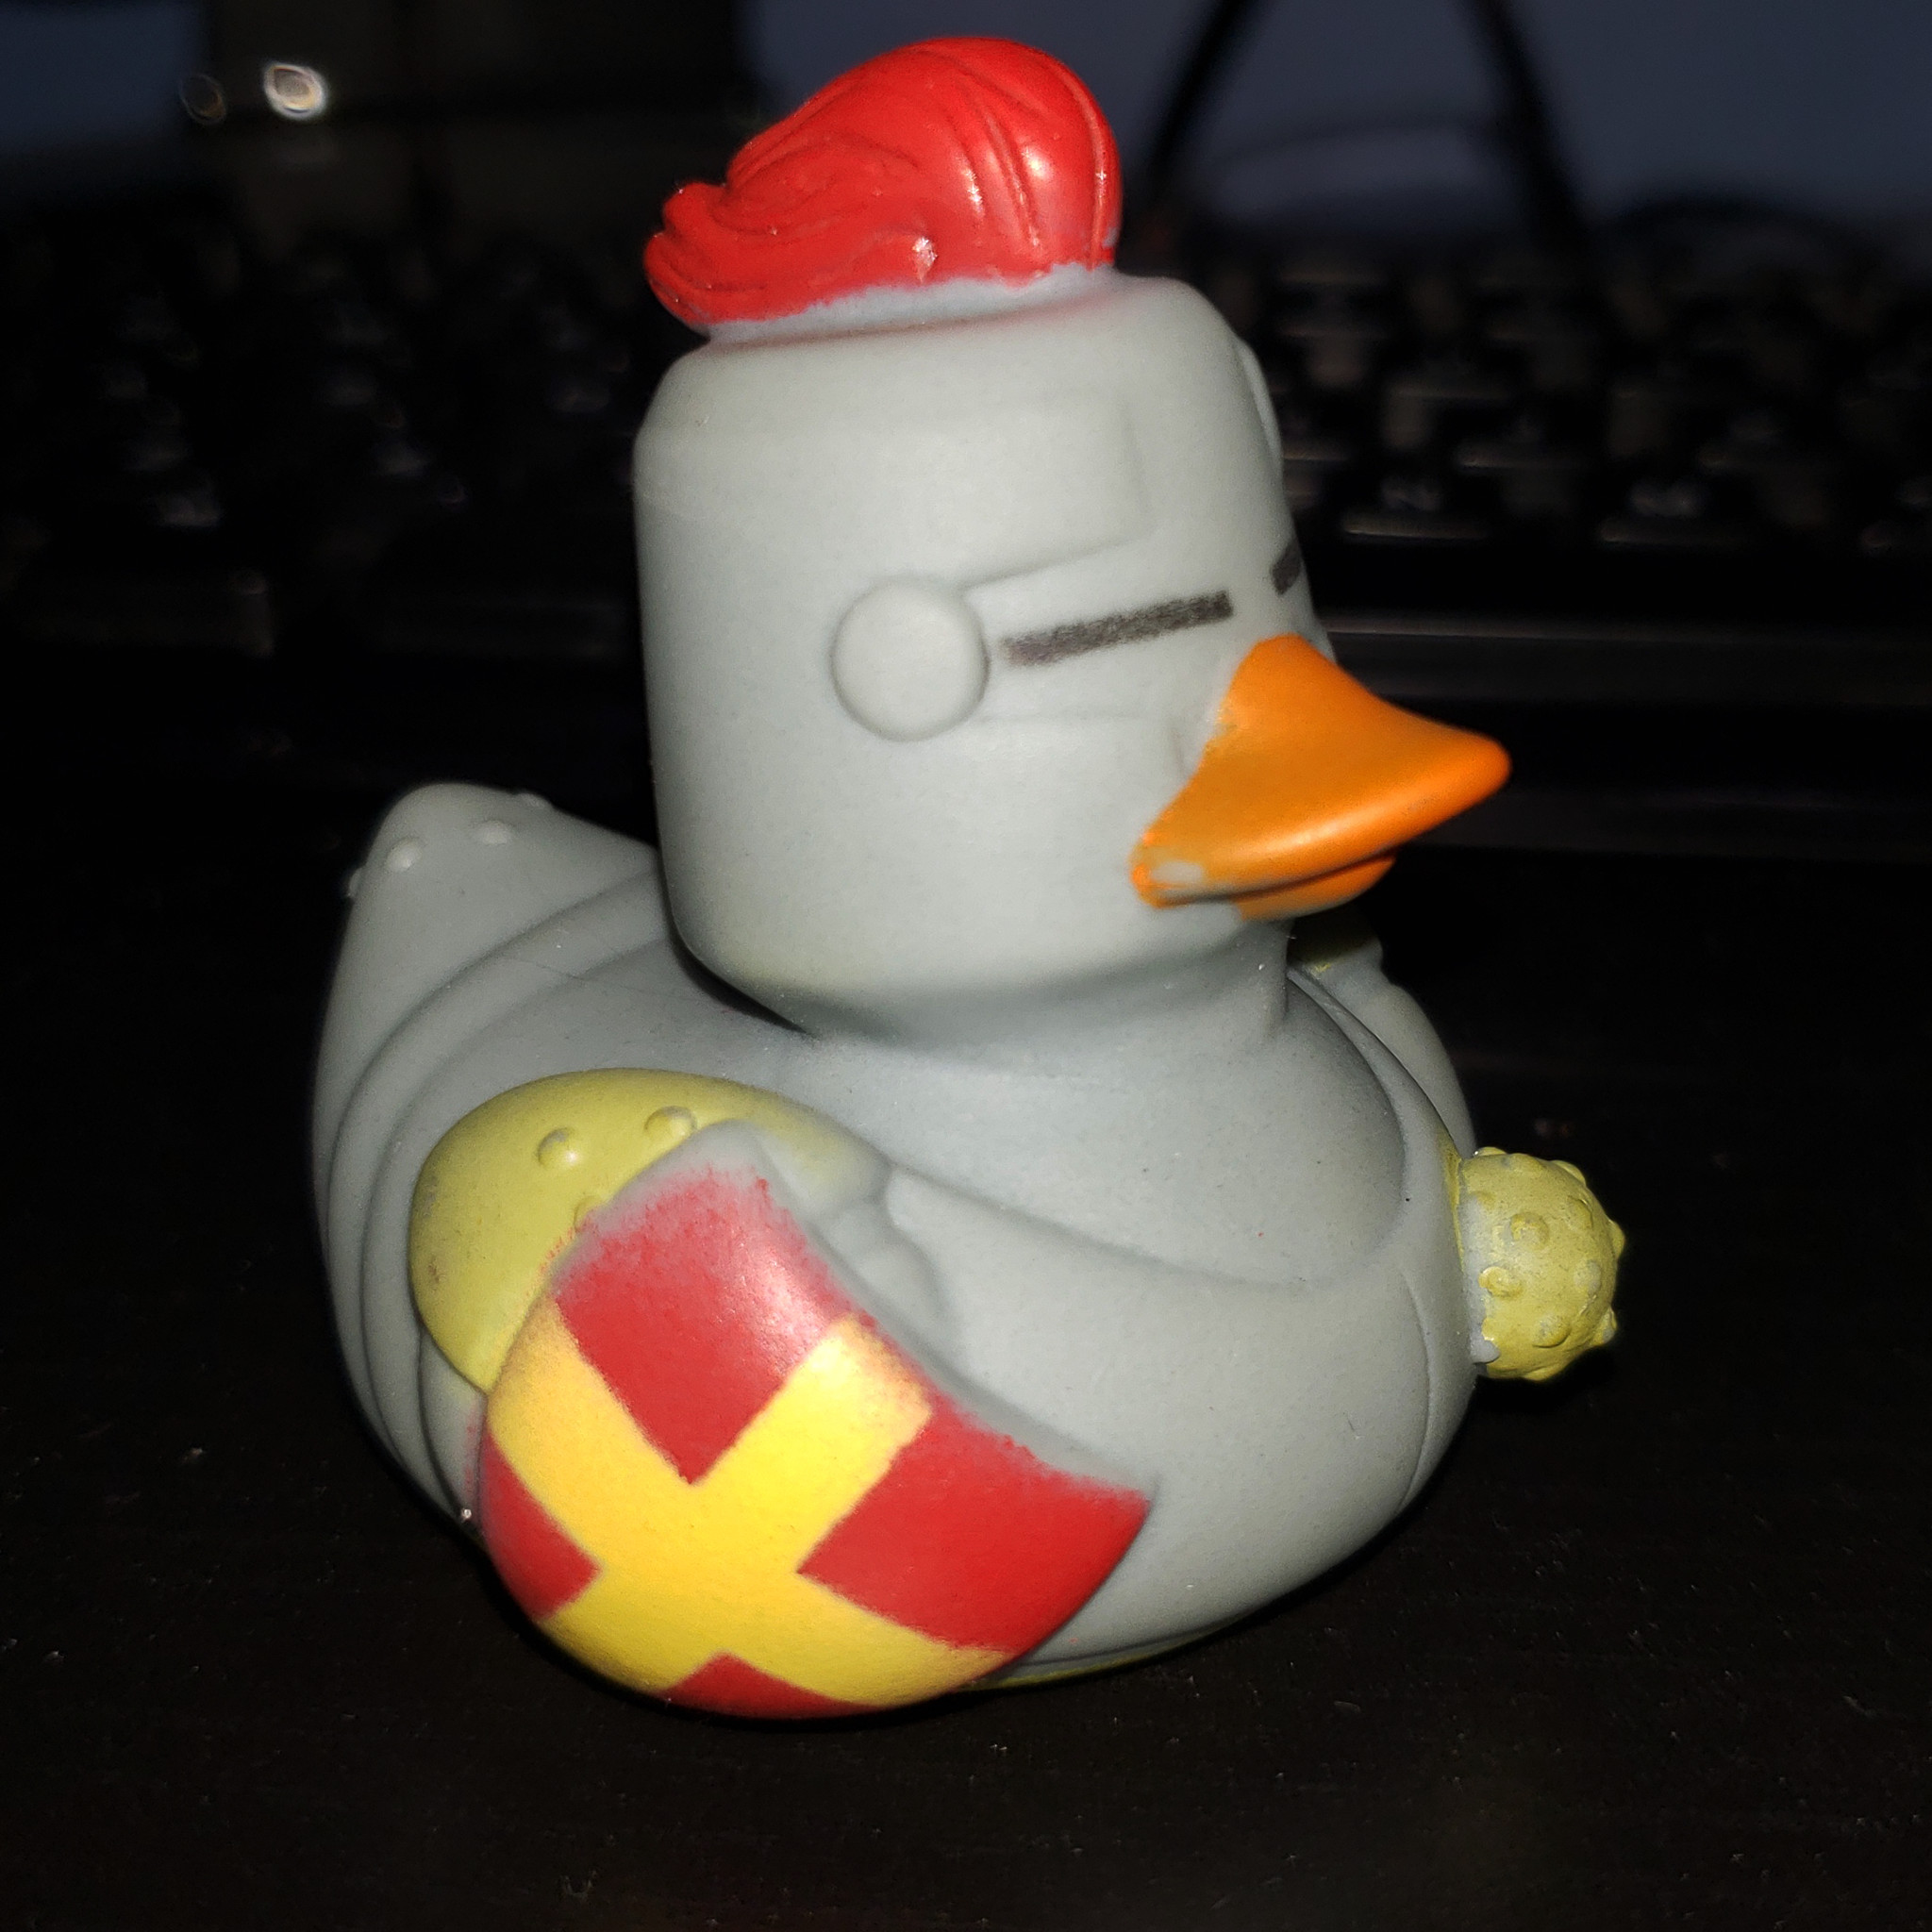 Photo of duck toy reference.